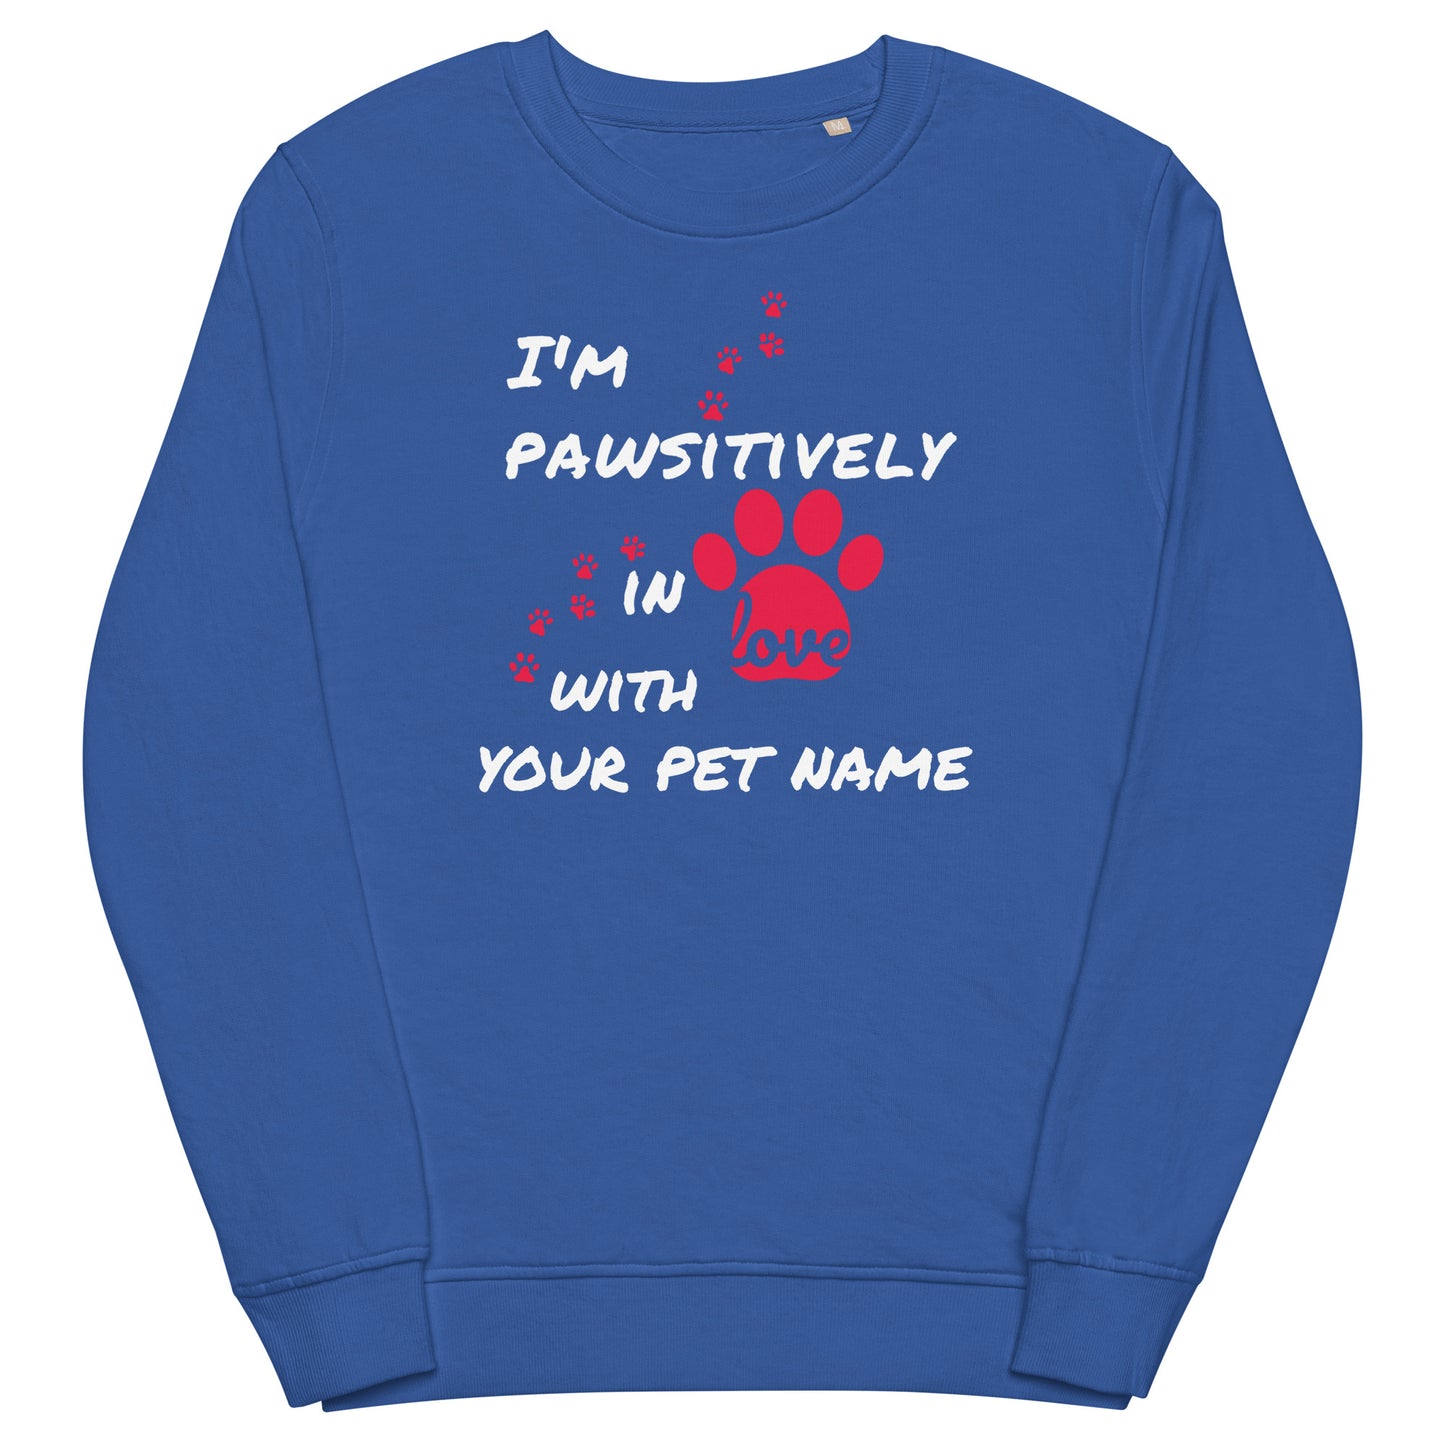 Unisex Organic Sweatshirt - Pawsitively in Love (PERSONALIZED)